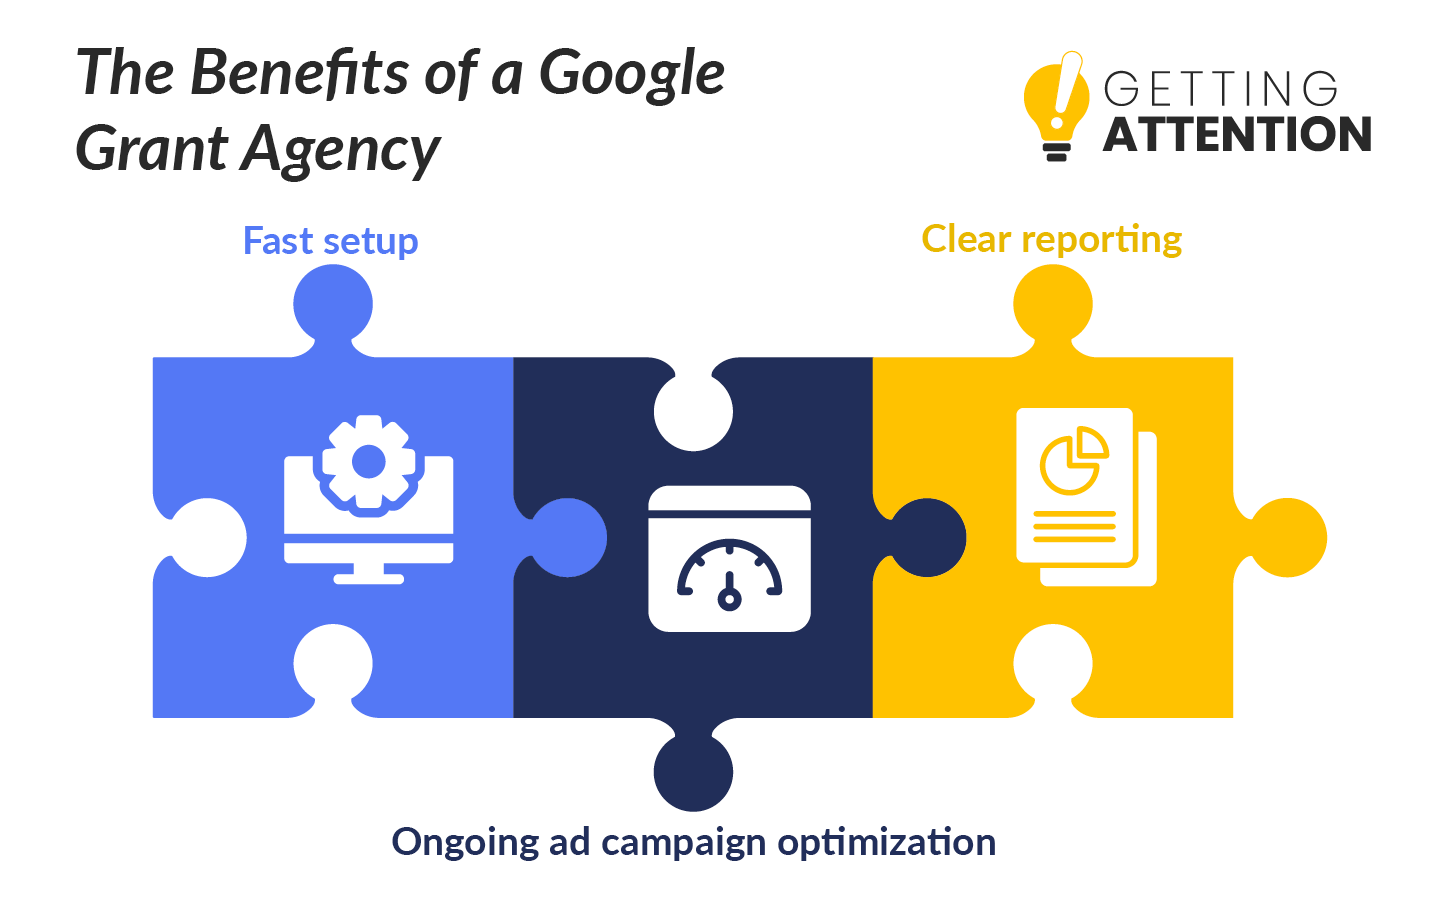 This graphic shows the core benefits a nonprofit can expect from working with a Google Grant agency.